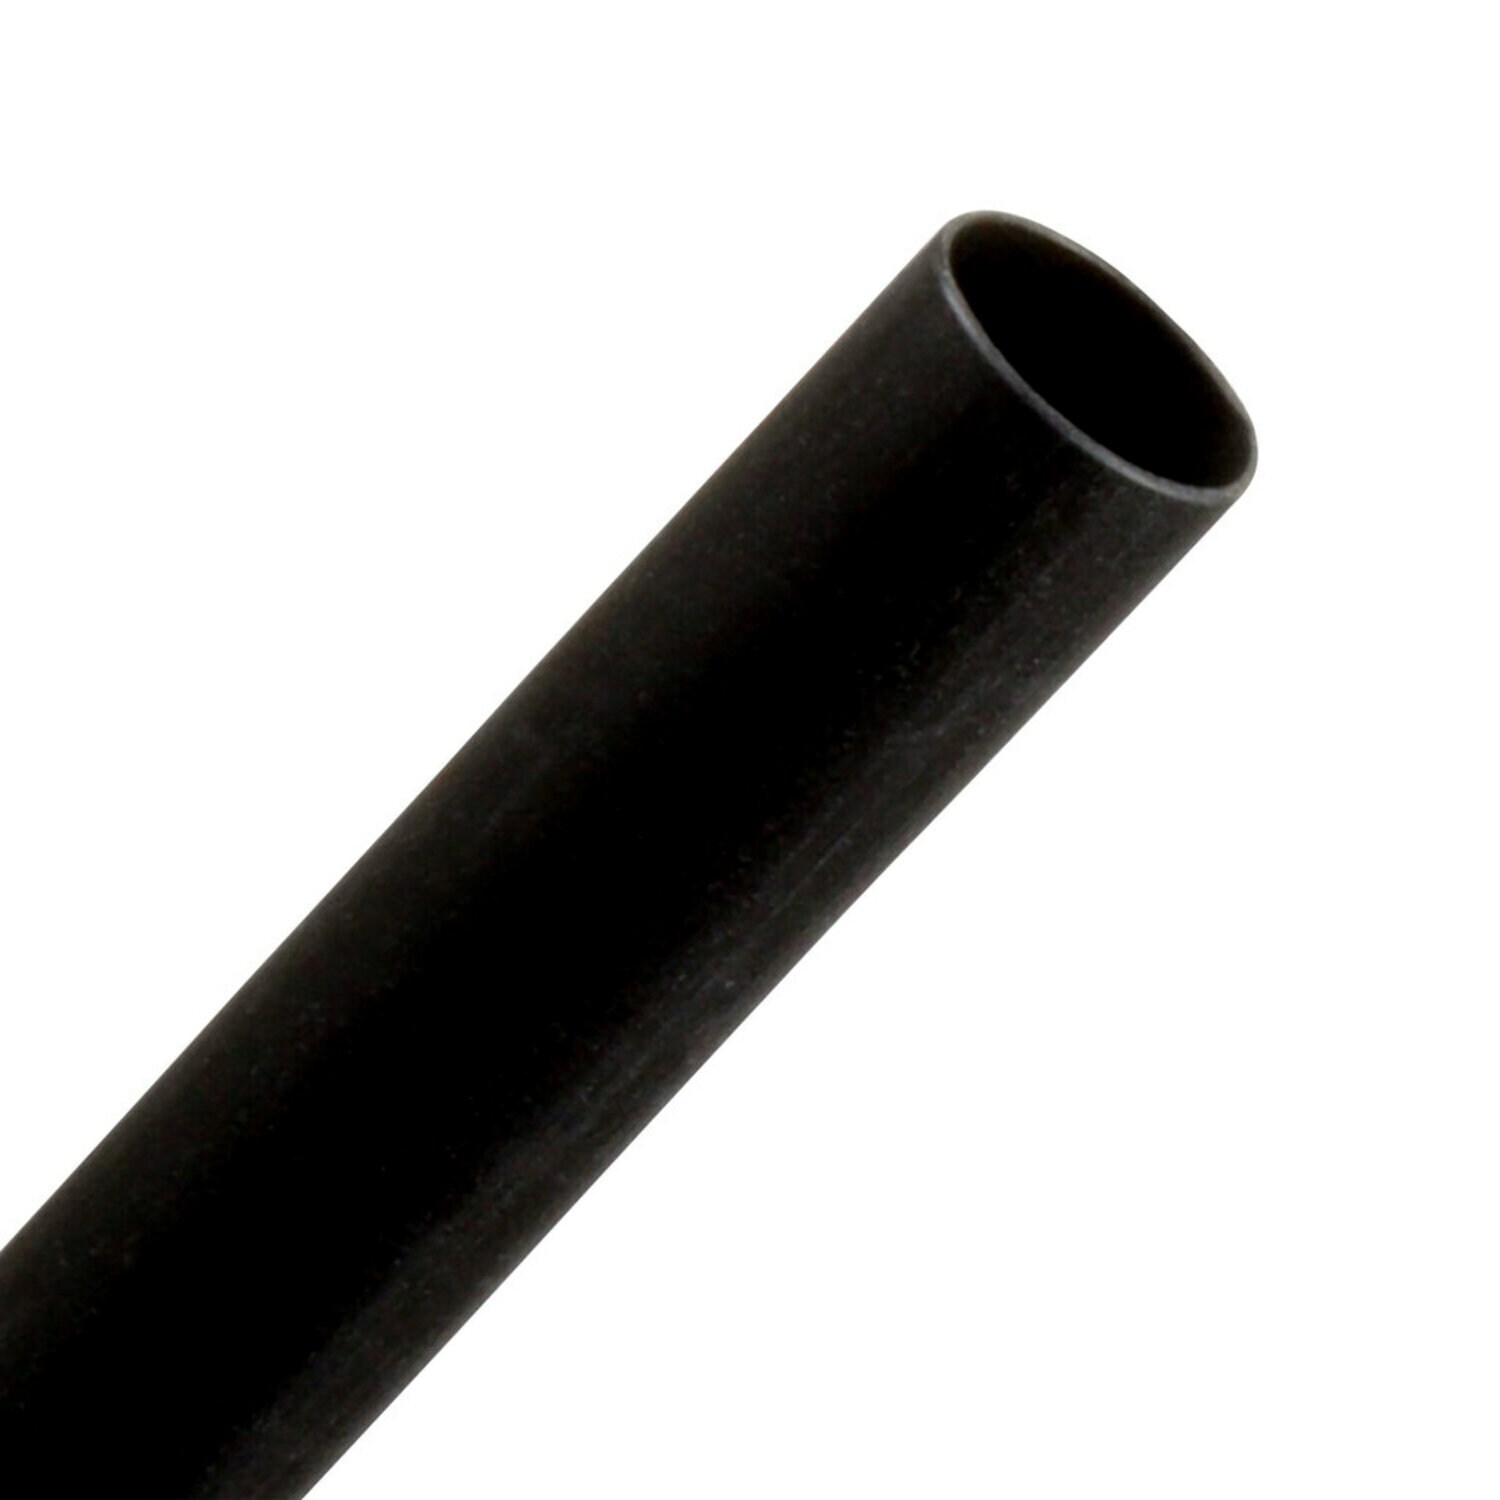 7000133688 - 3M Heat Shrink Thin-Wall Tubing FP-301-1/4-6"-Black-10-10 Pc Pks, 6 in
Length pieces, 10 pieces/pack, 10 packs/case